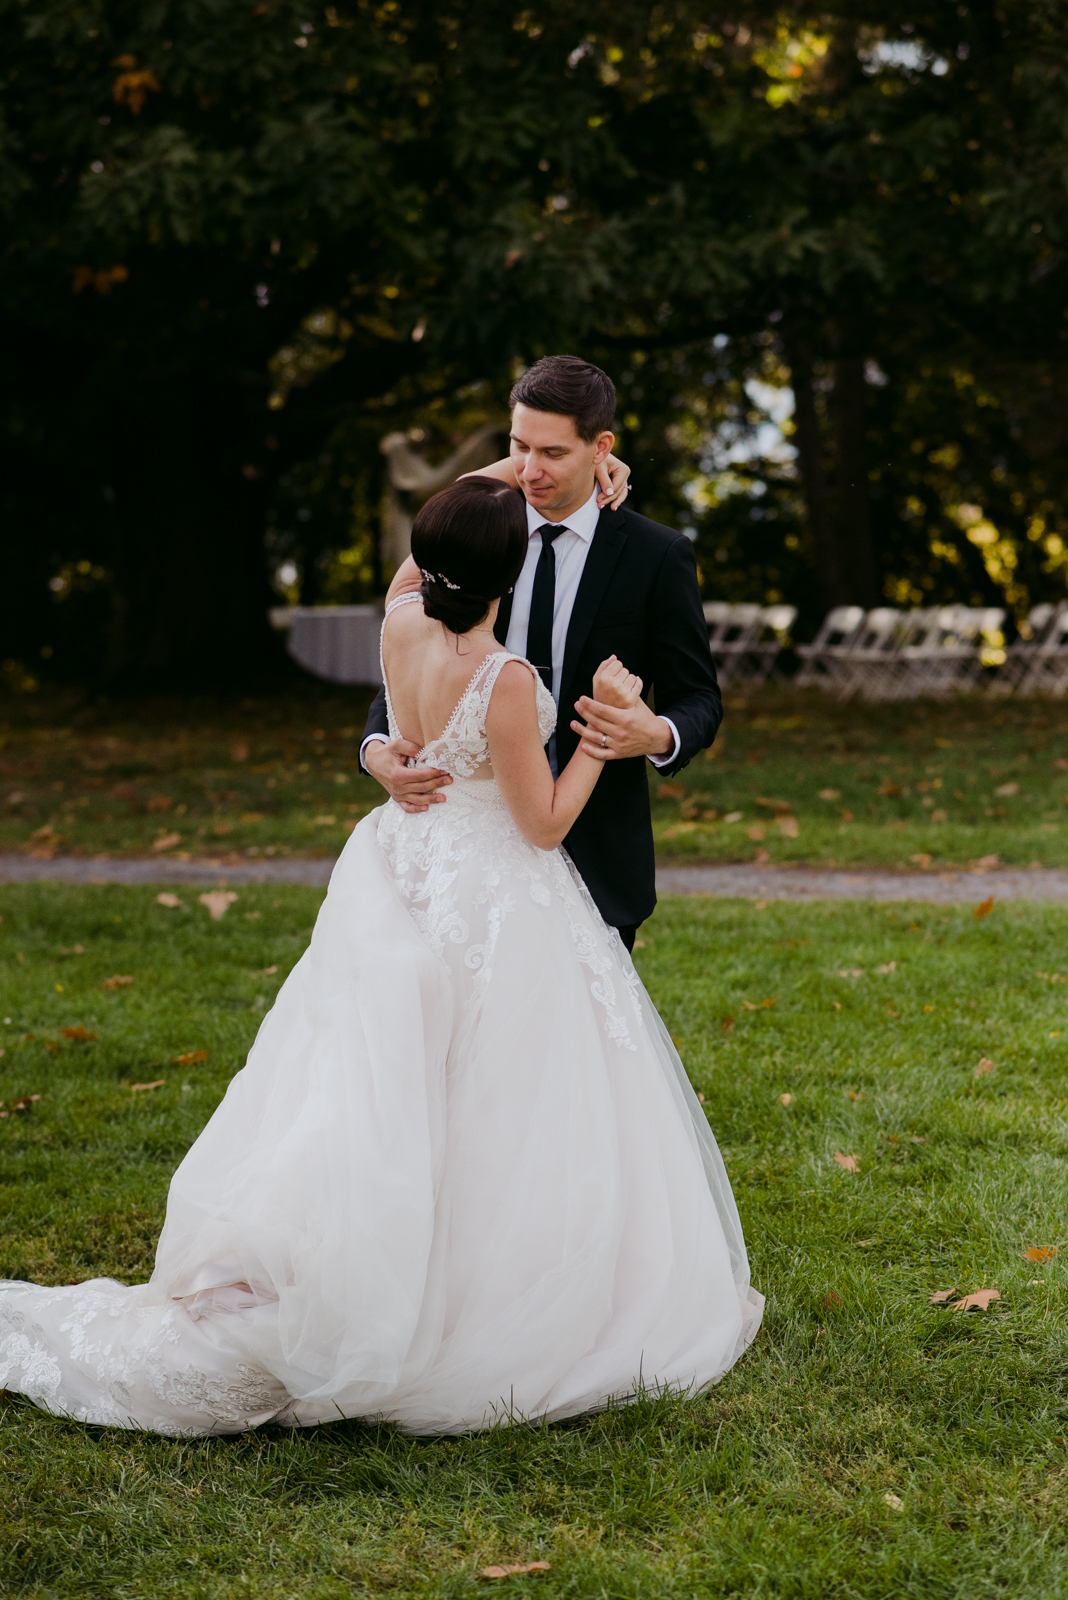 bride and groom first dance outdoors on the grass of garden party wedding